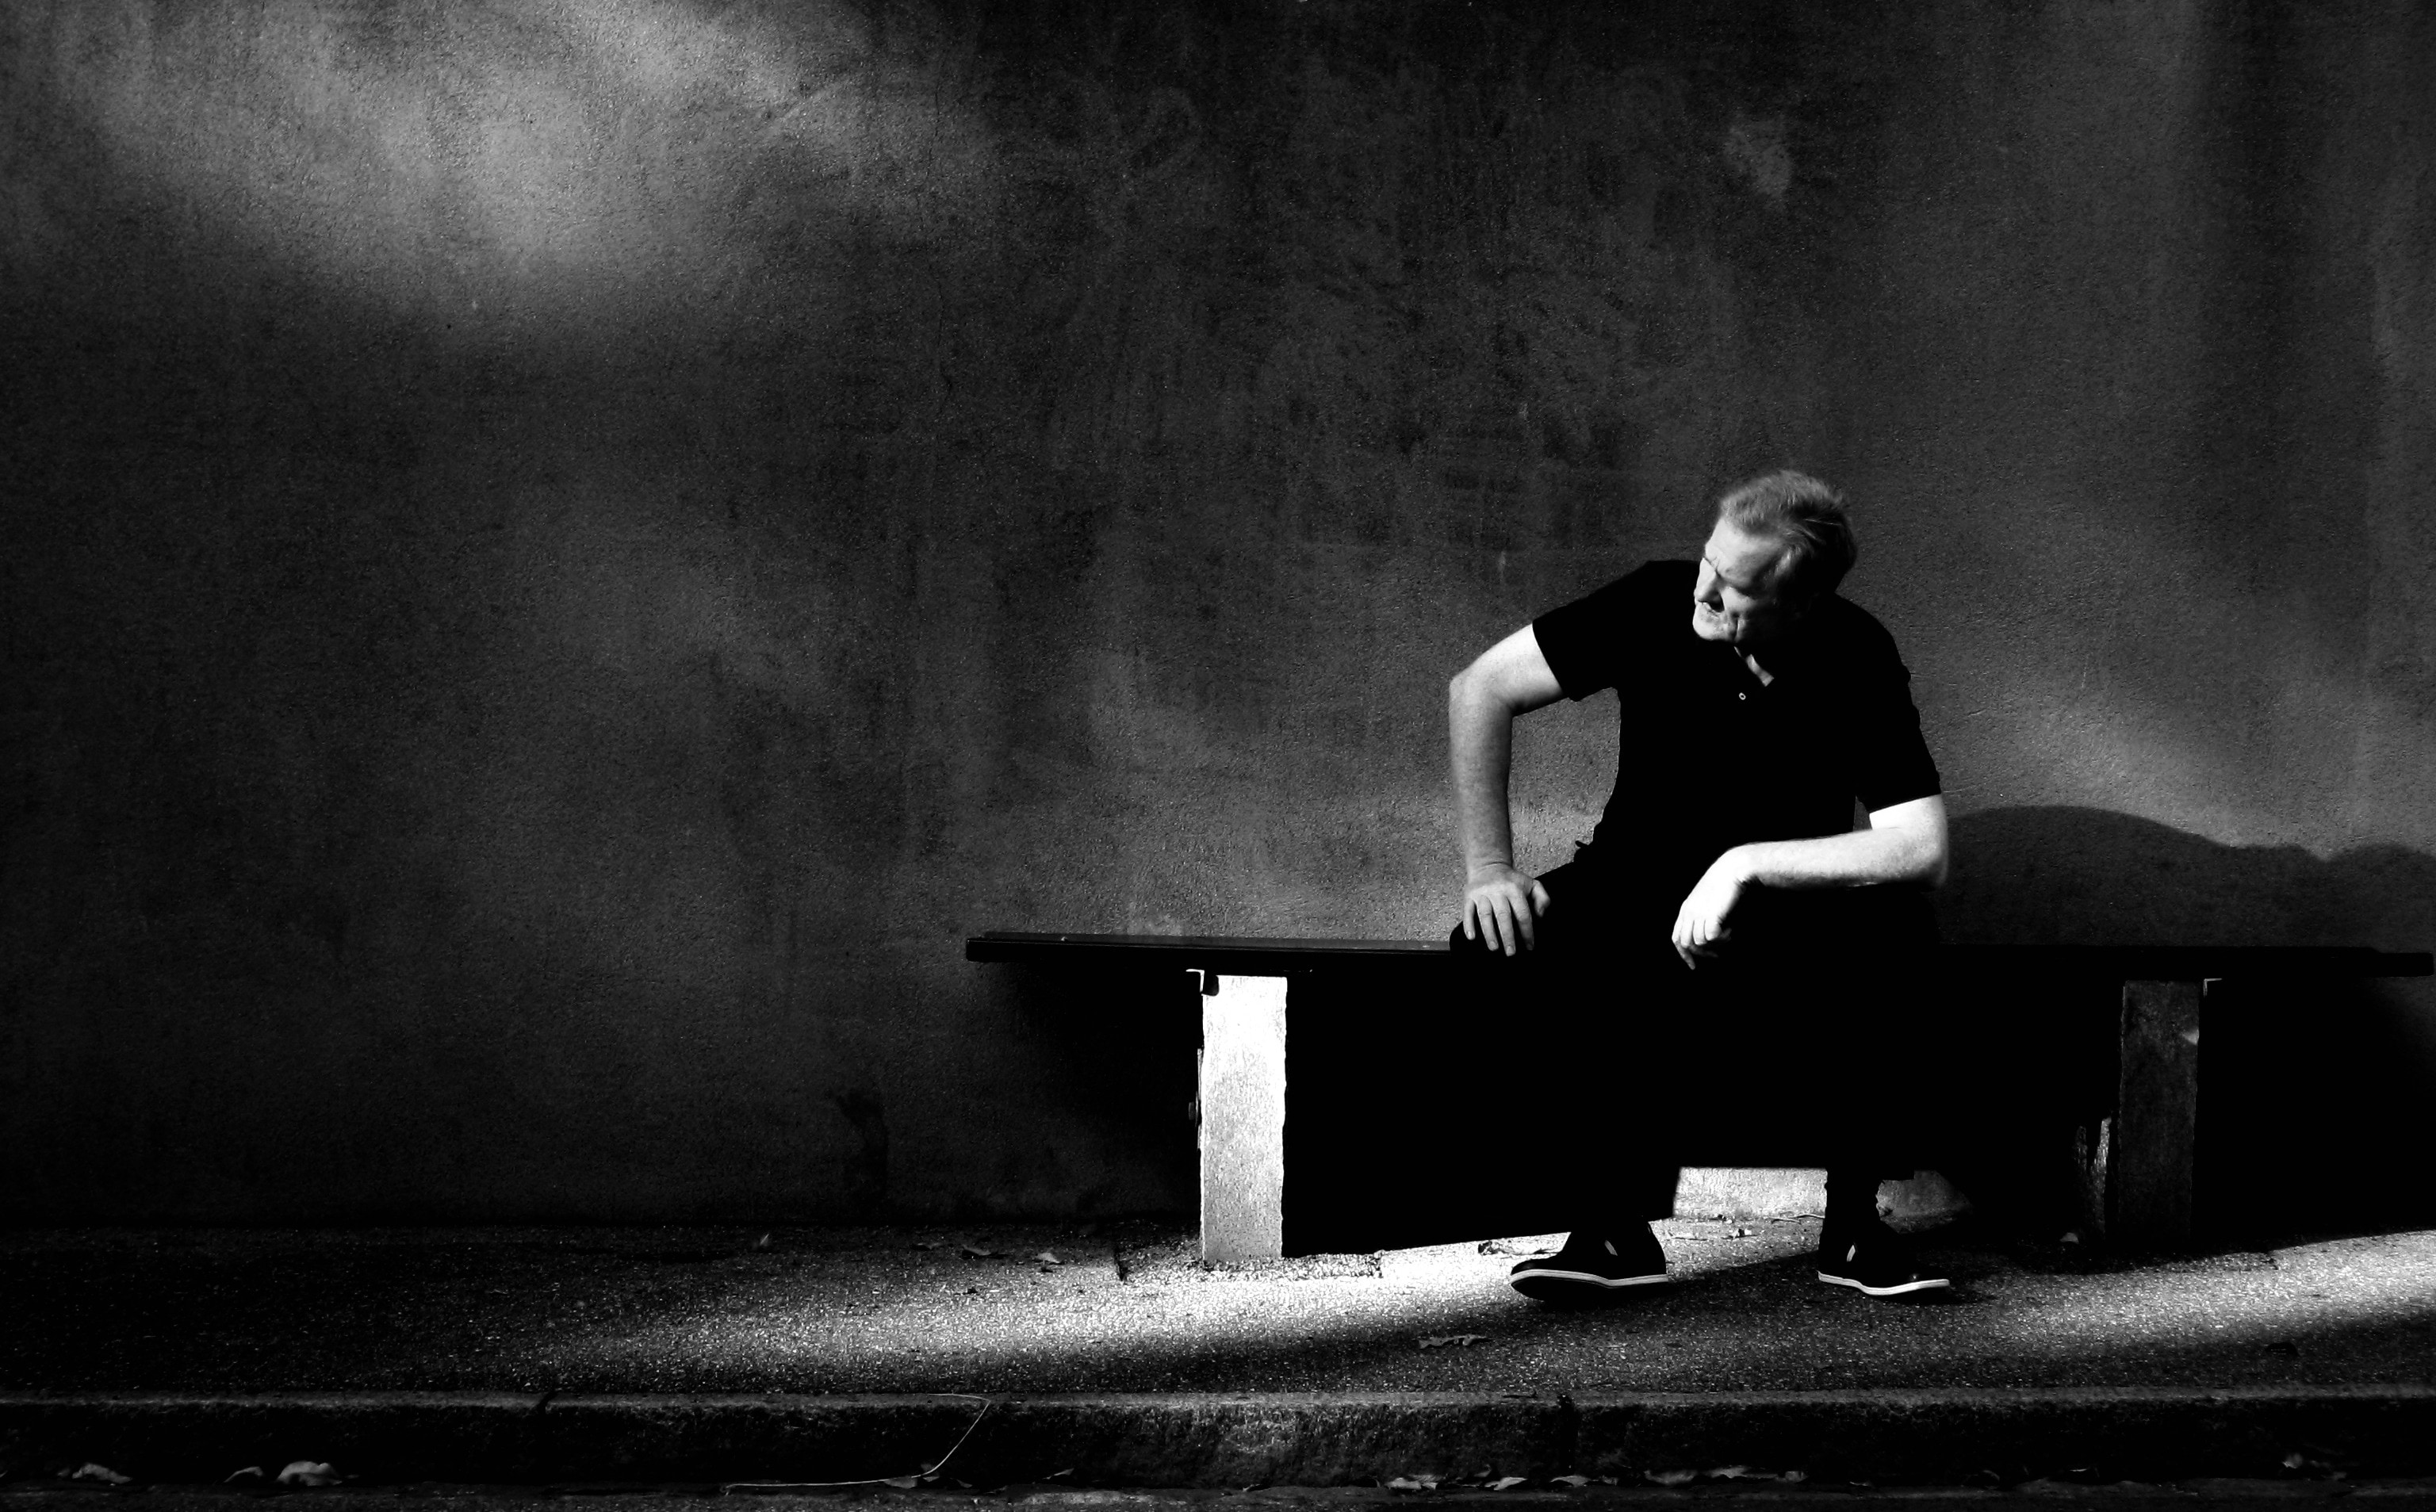 grayscale photo of man sitting on bench